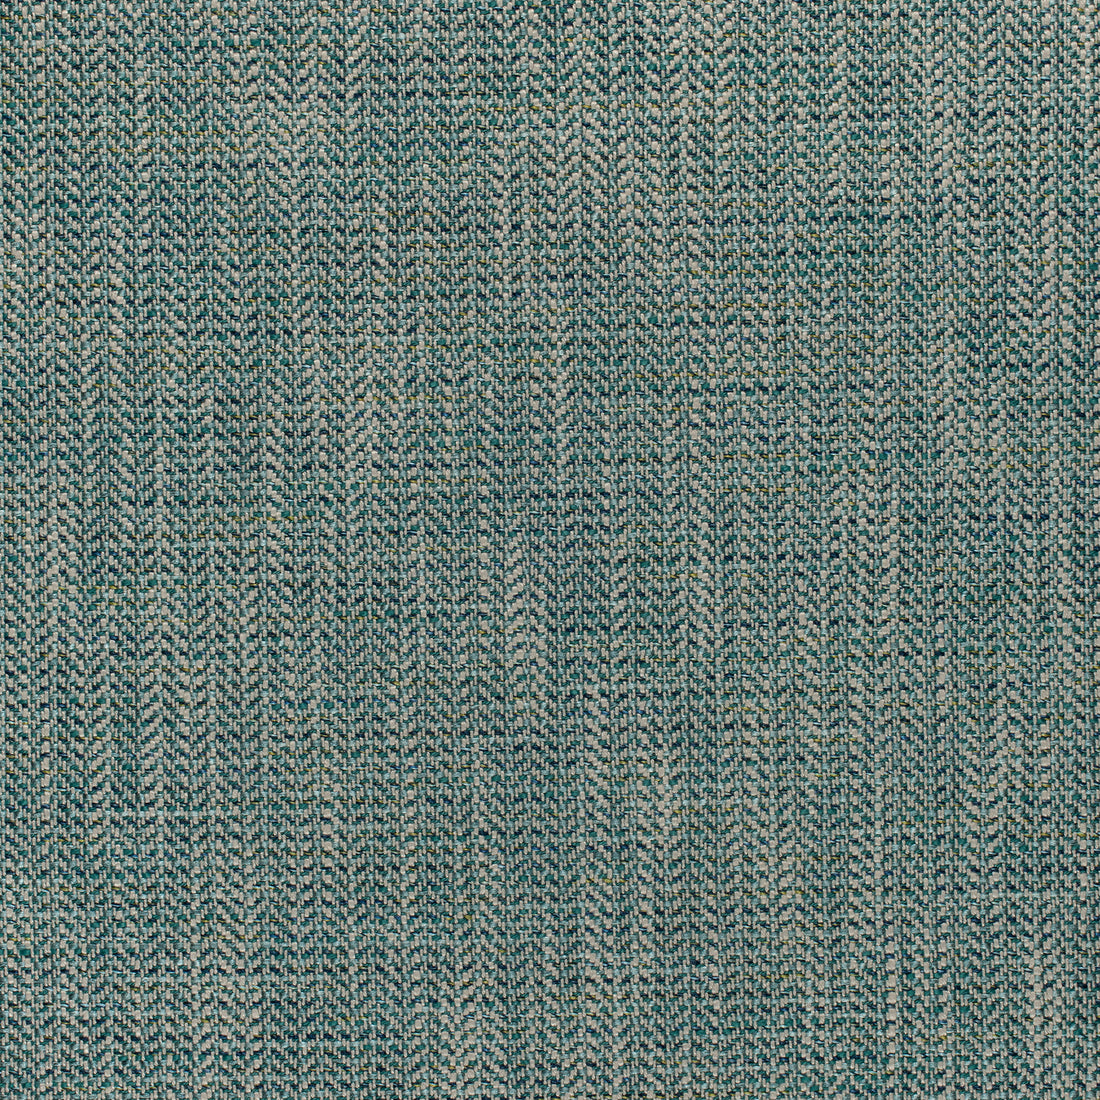 Ashbourne Tweed fabric in teal color - pattern number W80611 - by Thibaut in the Pinnacle collection